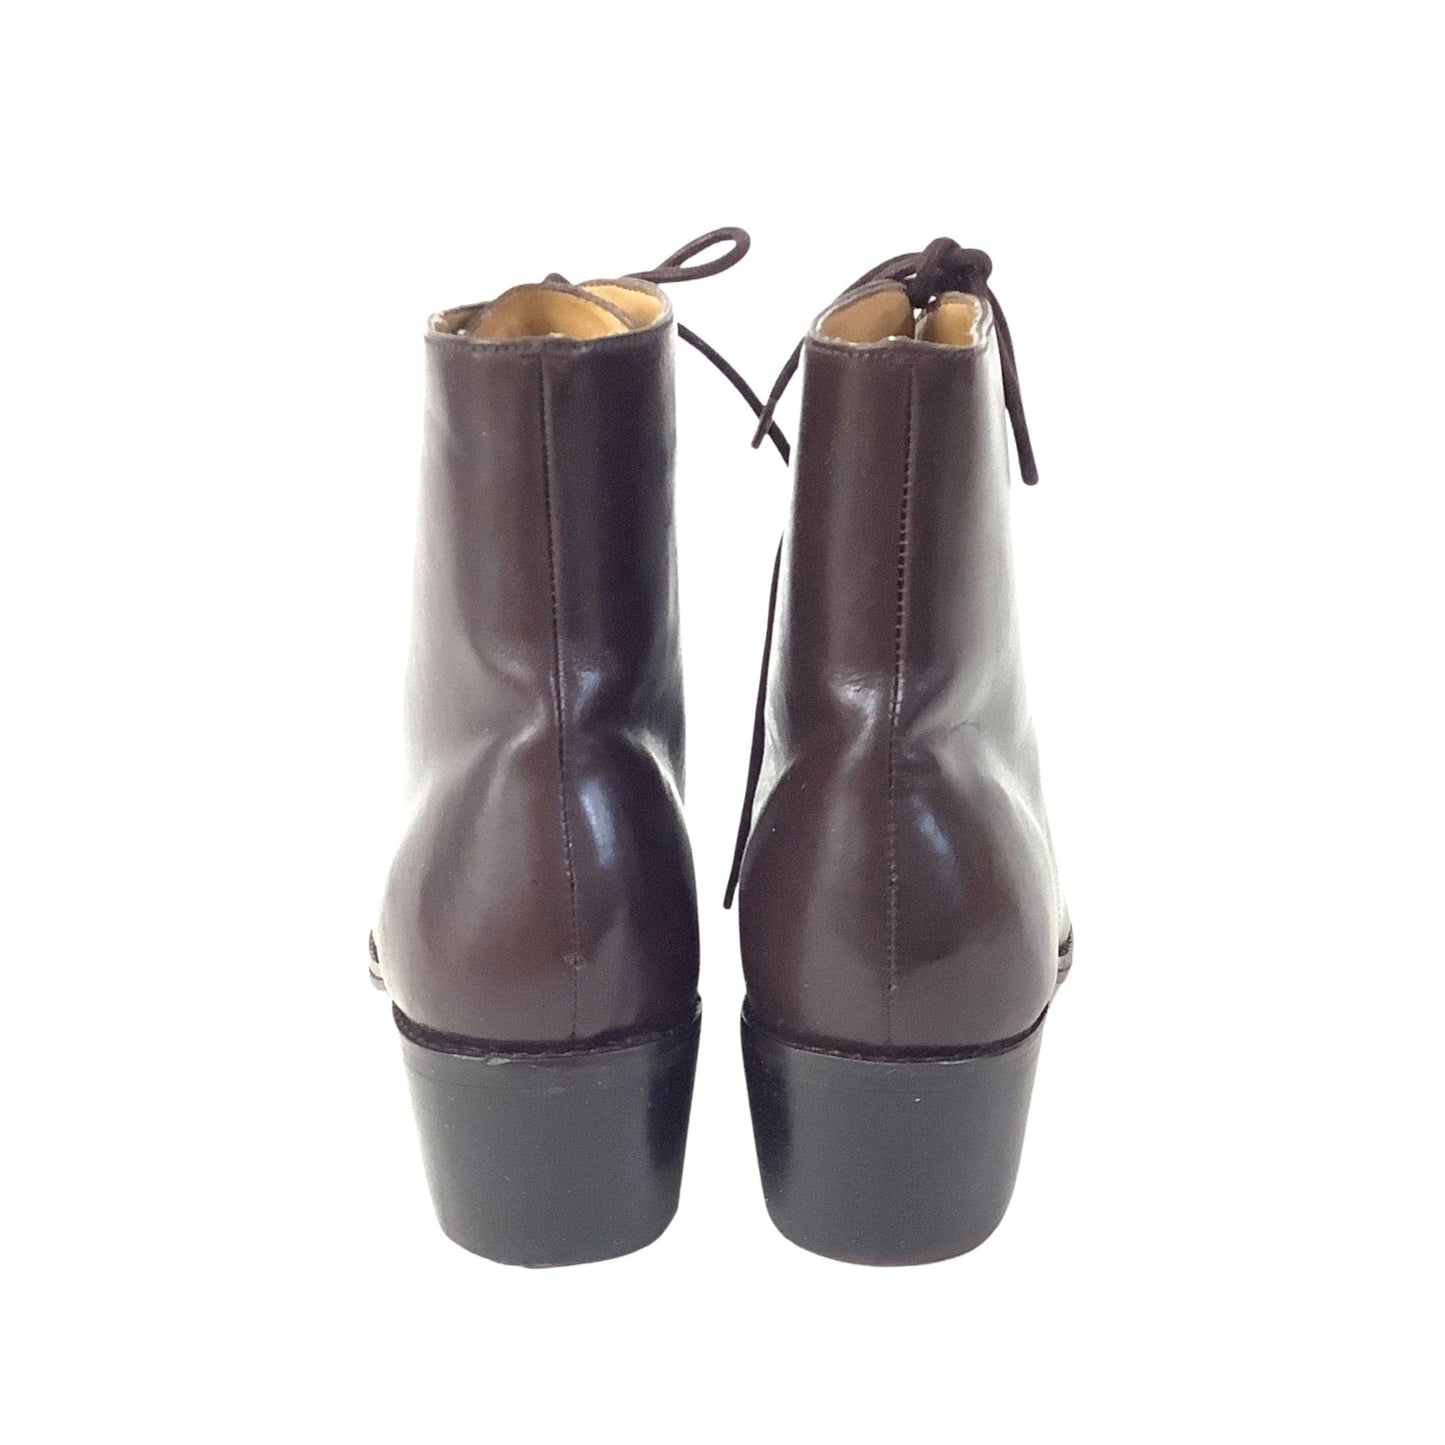 '80s Laced Ankle Boots 7 / Brown / Vintage 1980s